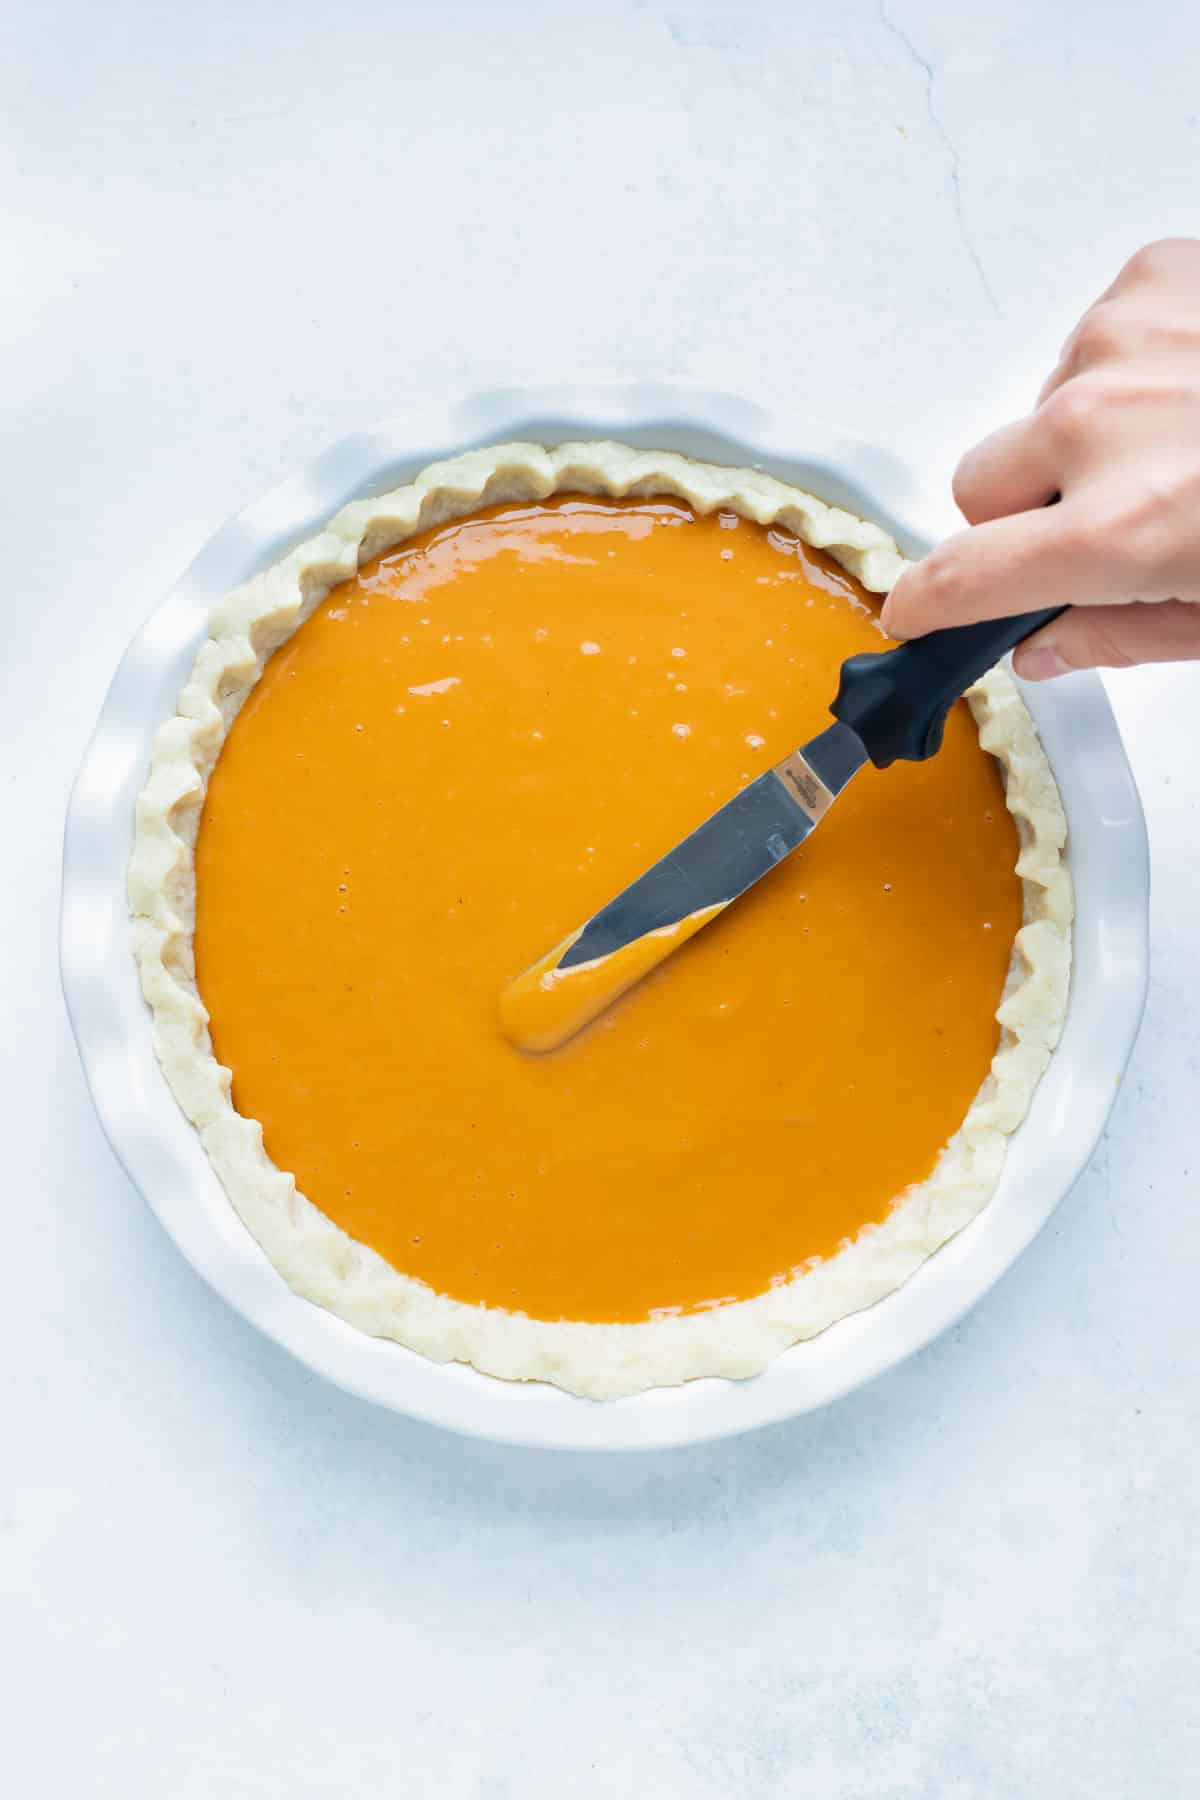 Creamy sweet potato filling is added to the pie crust.